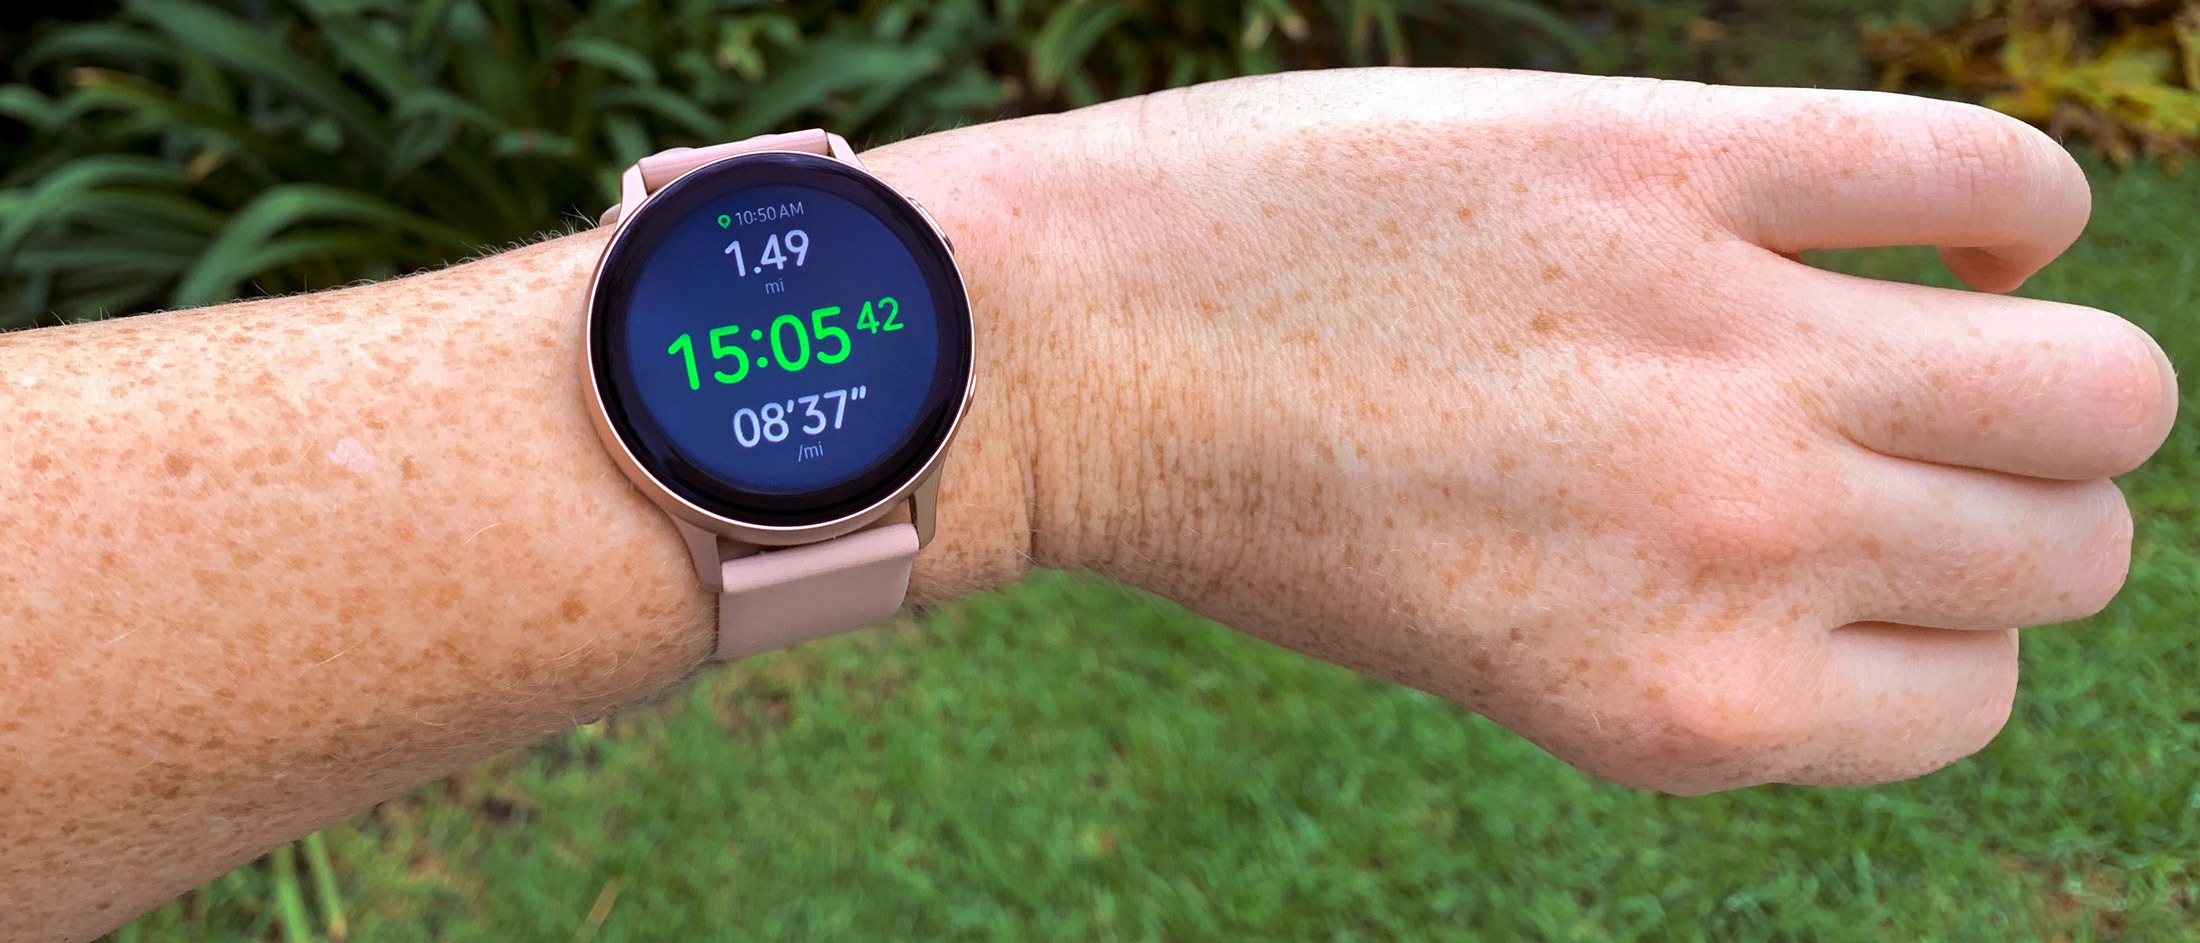 galaxy watch active vs fitbit charge 3